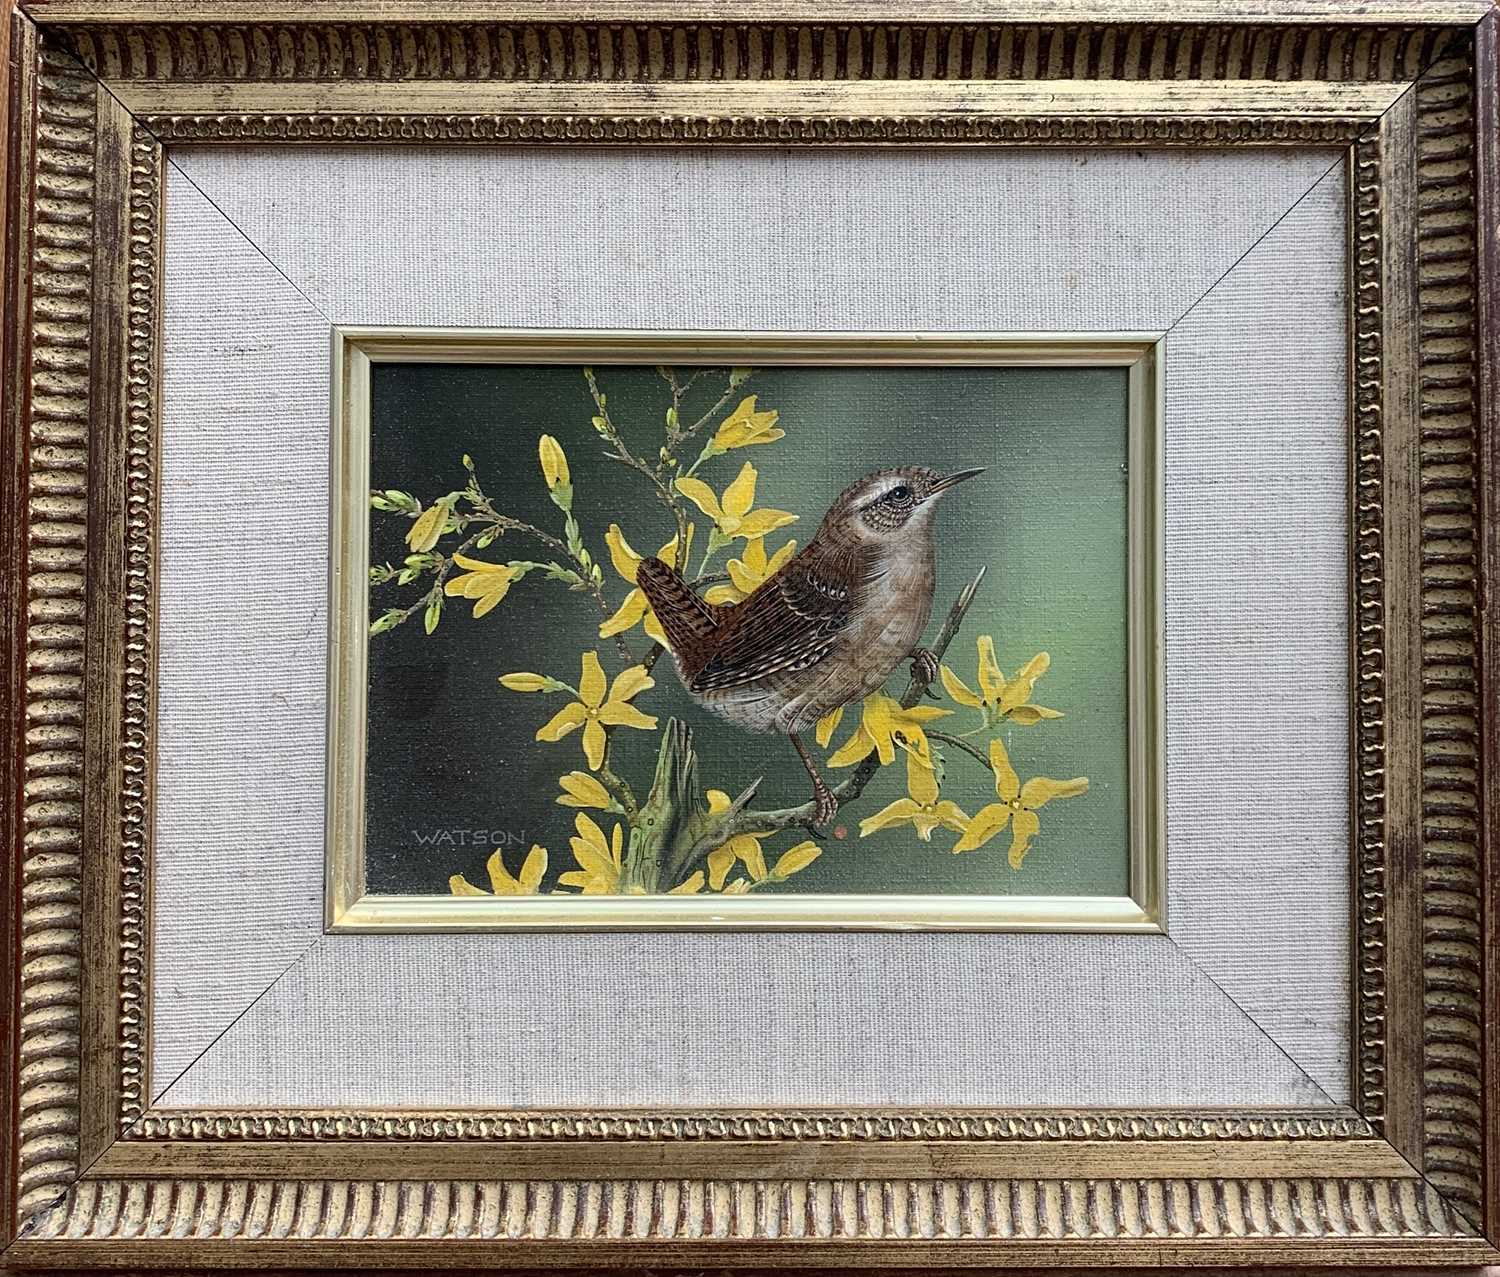 Christopher WATSON Wren on Forsythia Oil on canvas Signed, further signed and inscribed verso 12 x